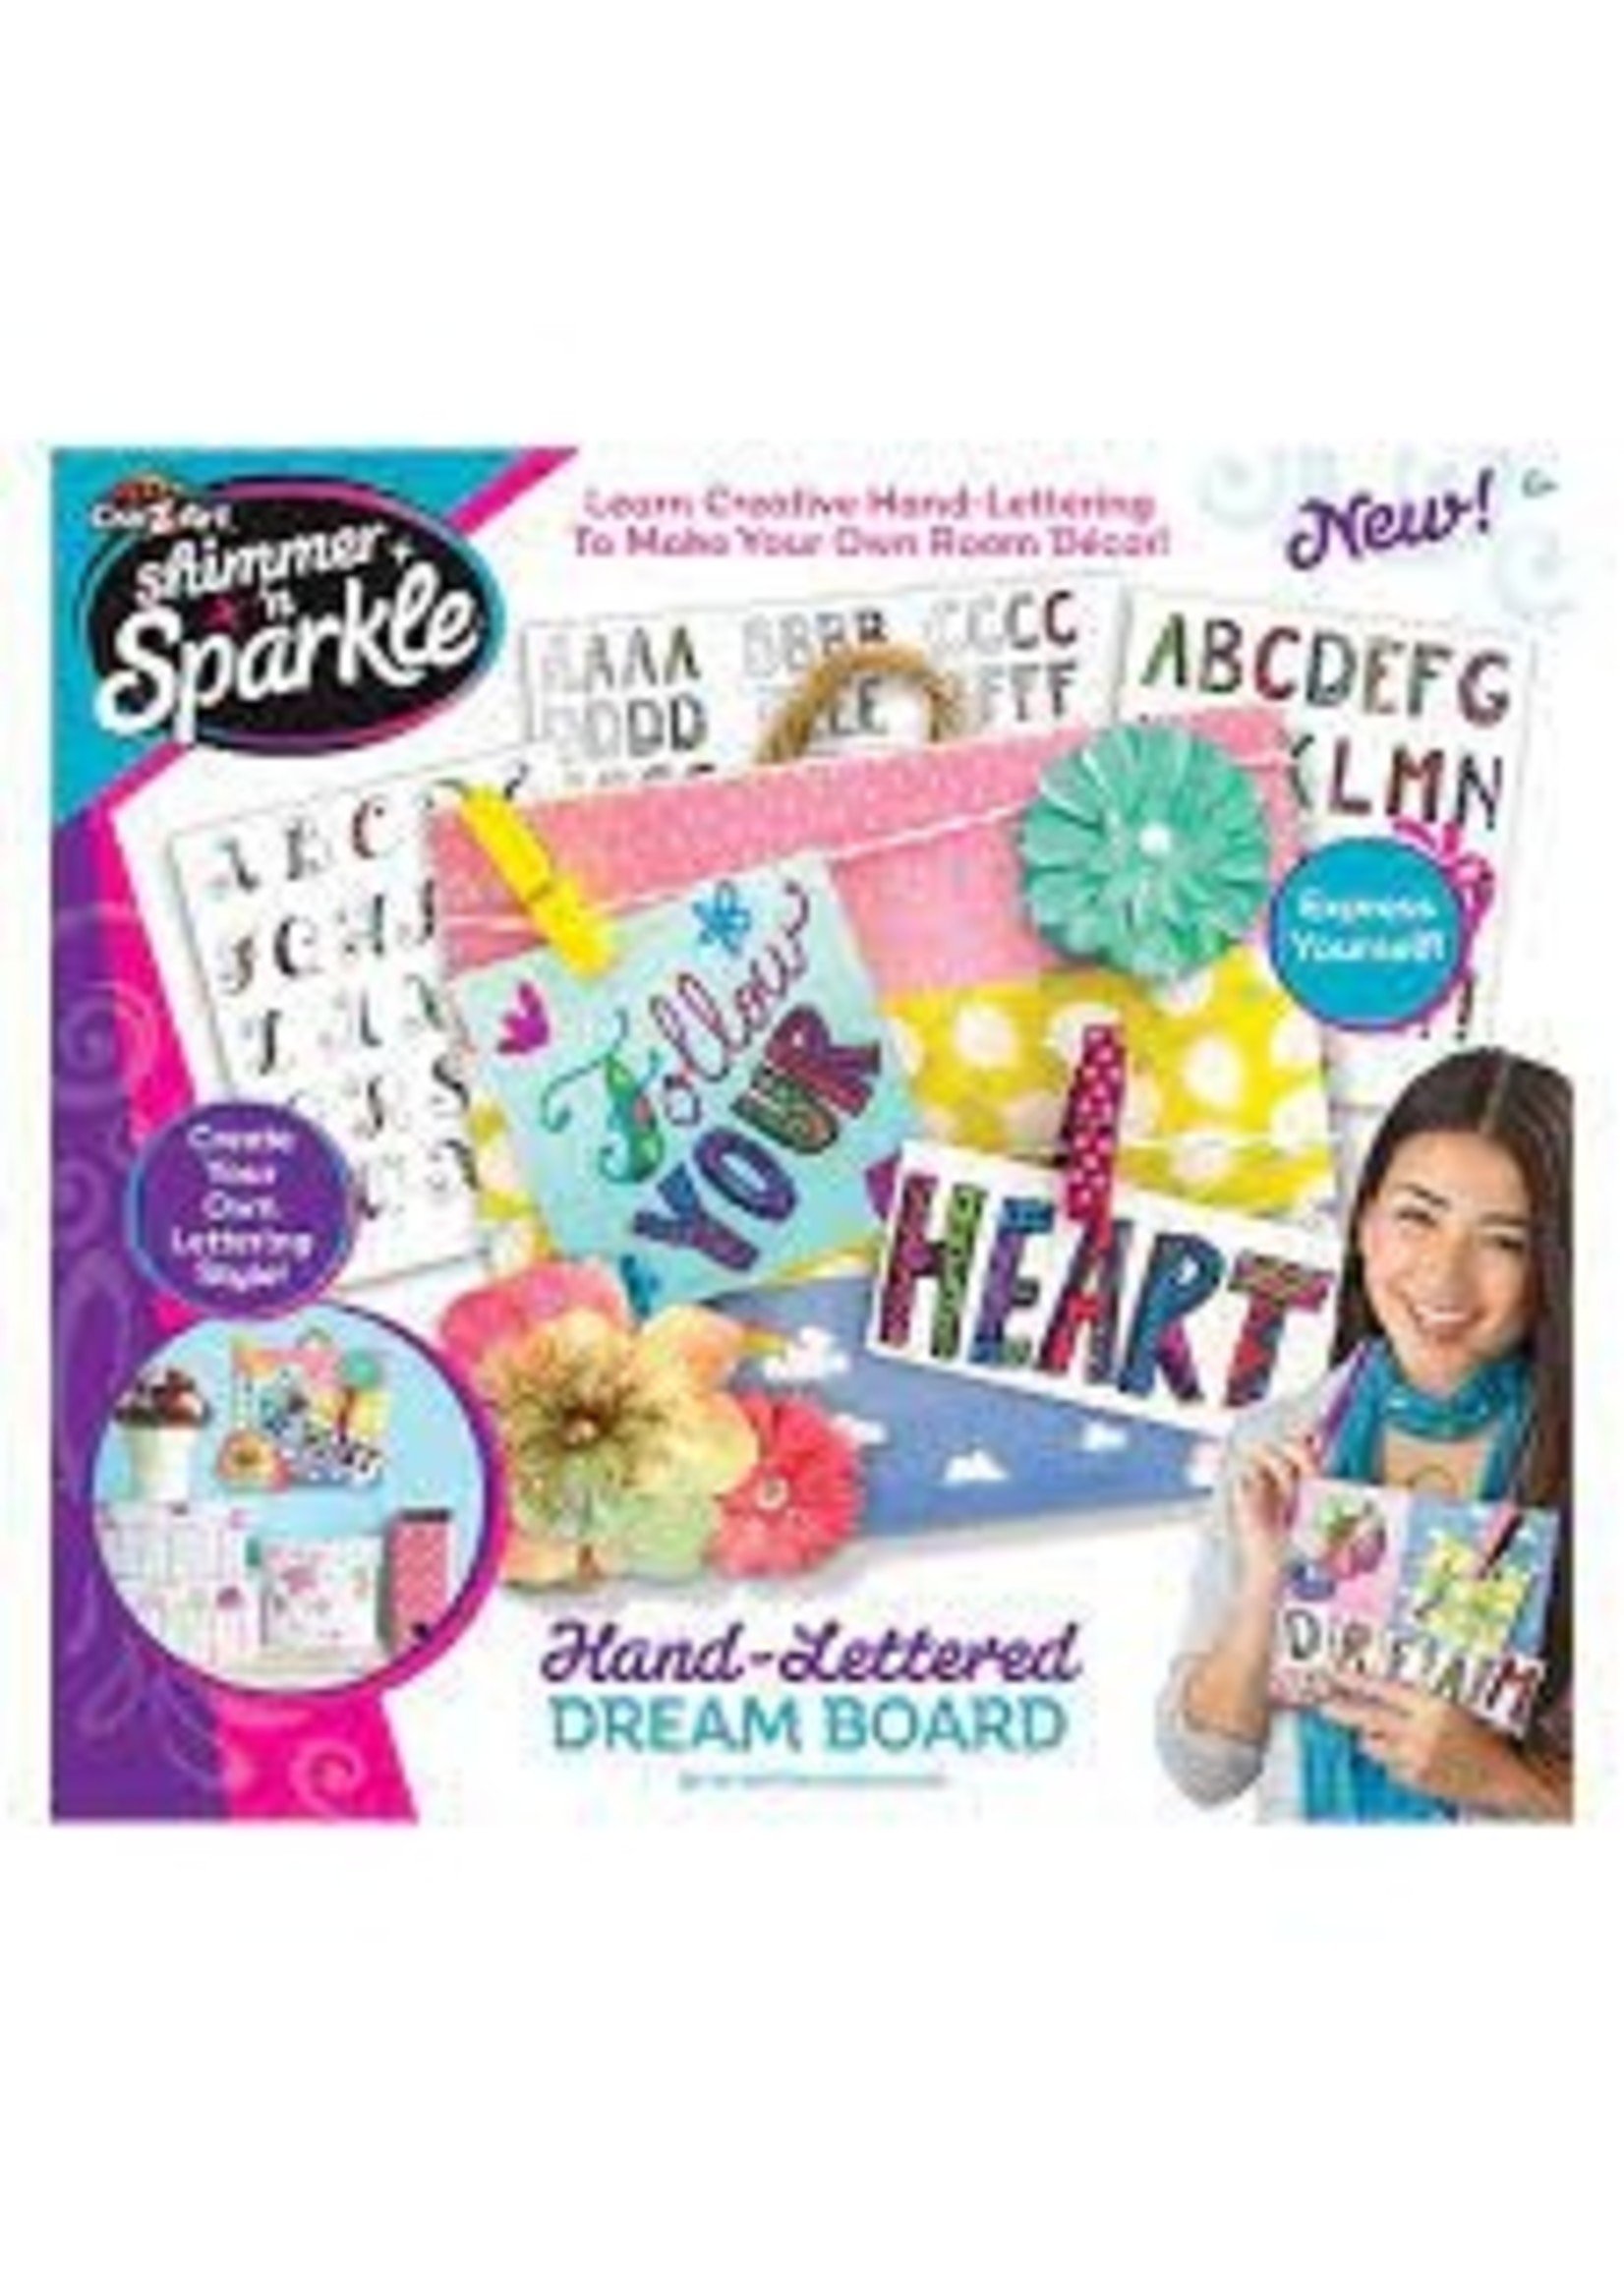 Shimmer and Sparkle Hand Letter Dream Board